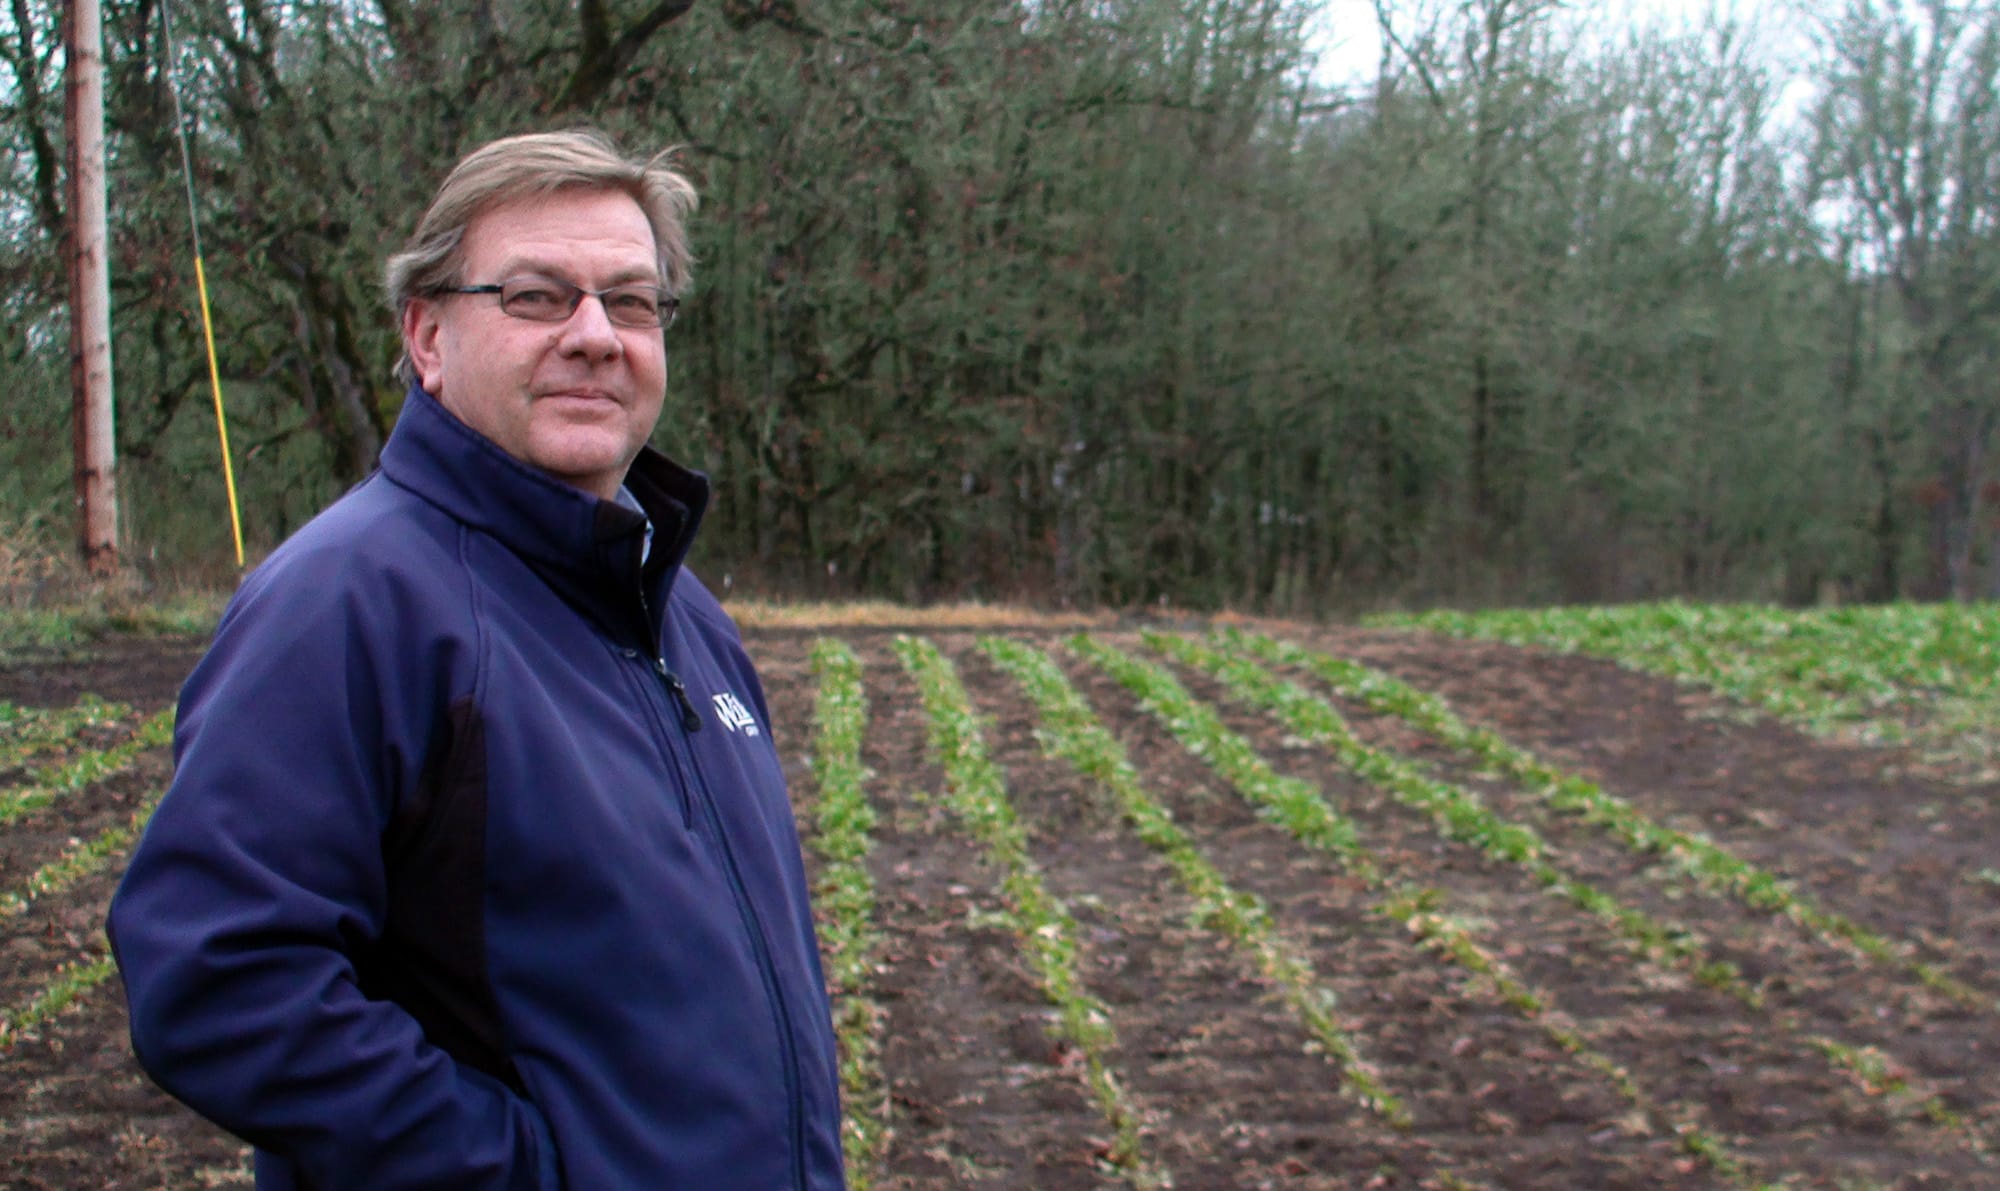 John Reerslev grows grass seed and seeds for biotech sugar beets on 1,100 acres near Junction City, Ore.